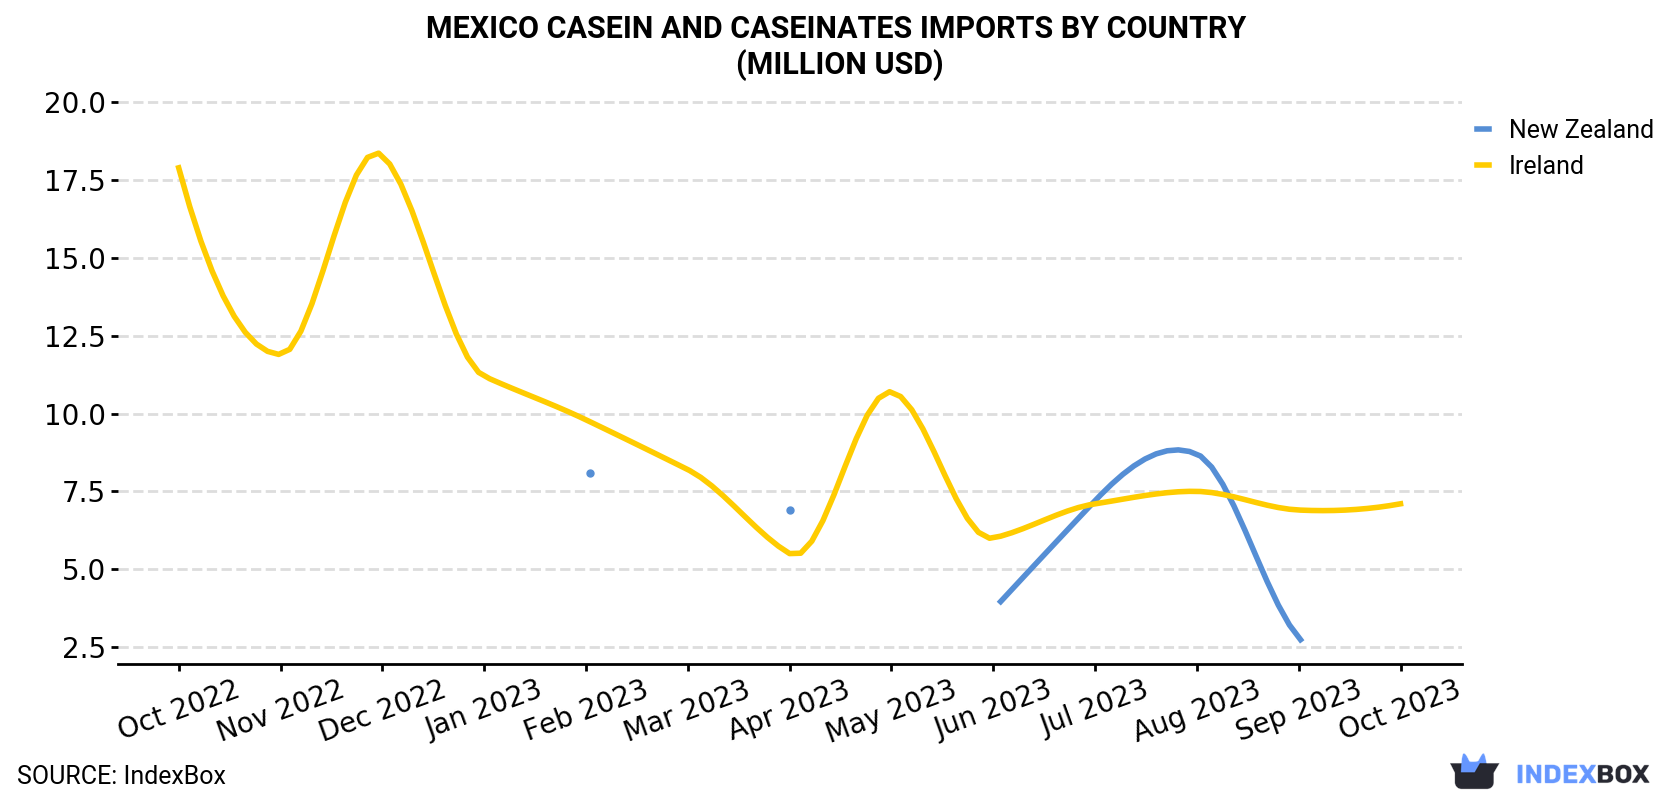 Mexico Casein And Caseinates Imports By Country (Million USD)